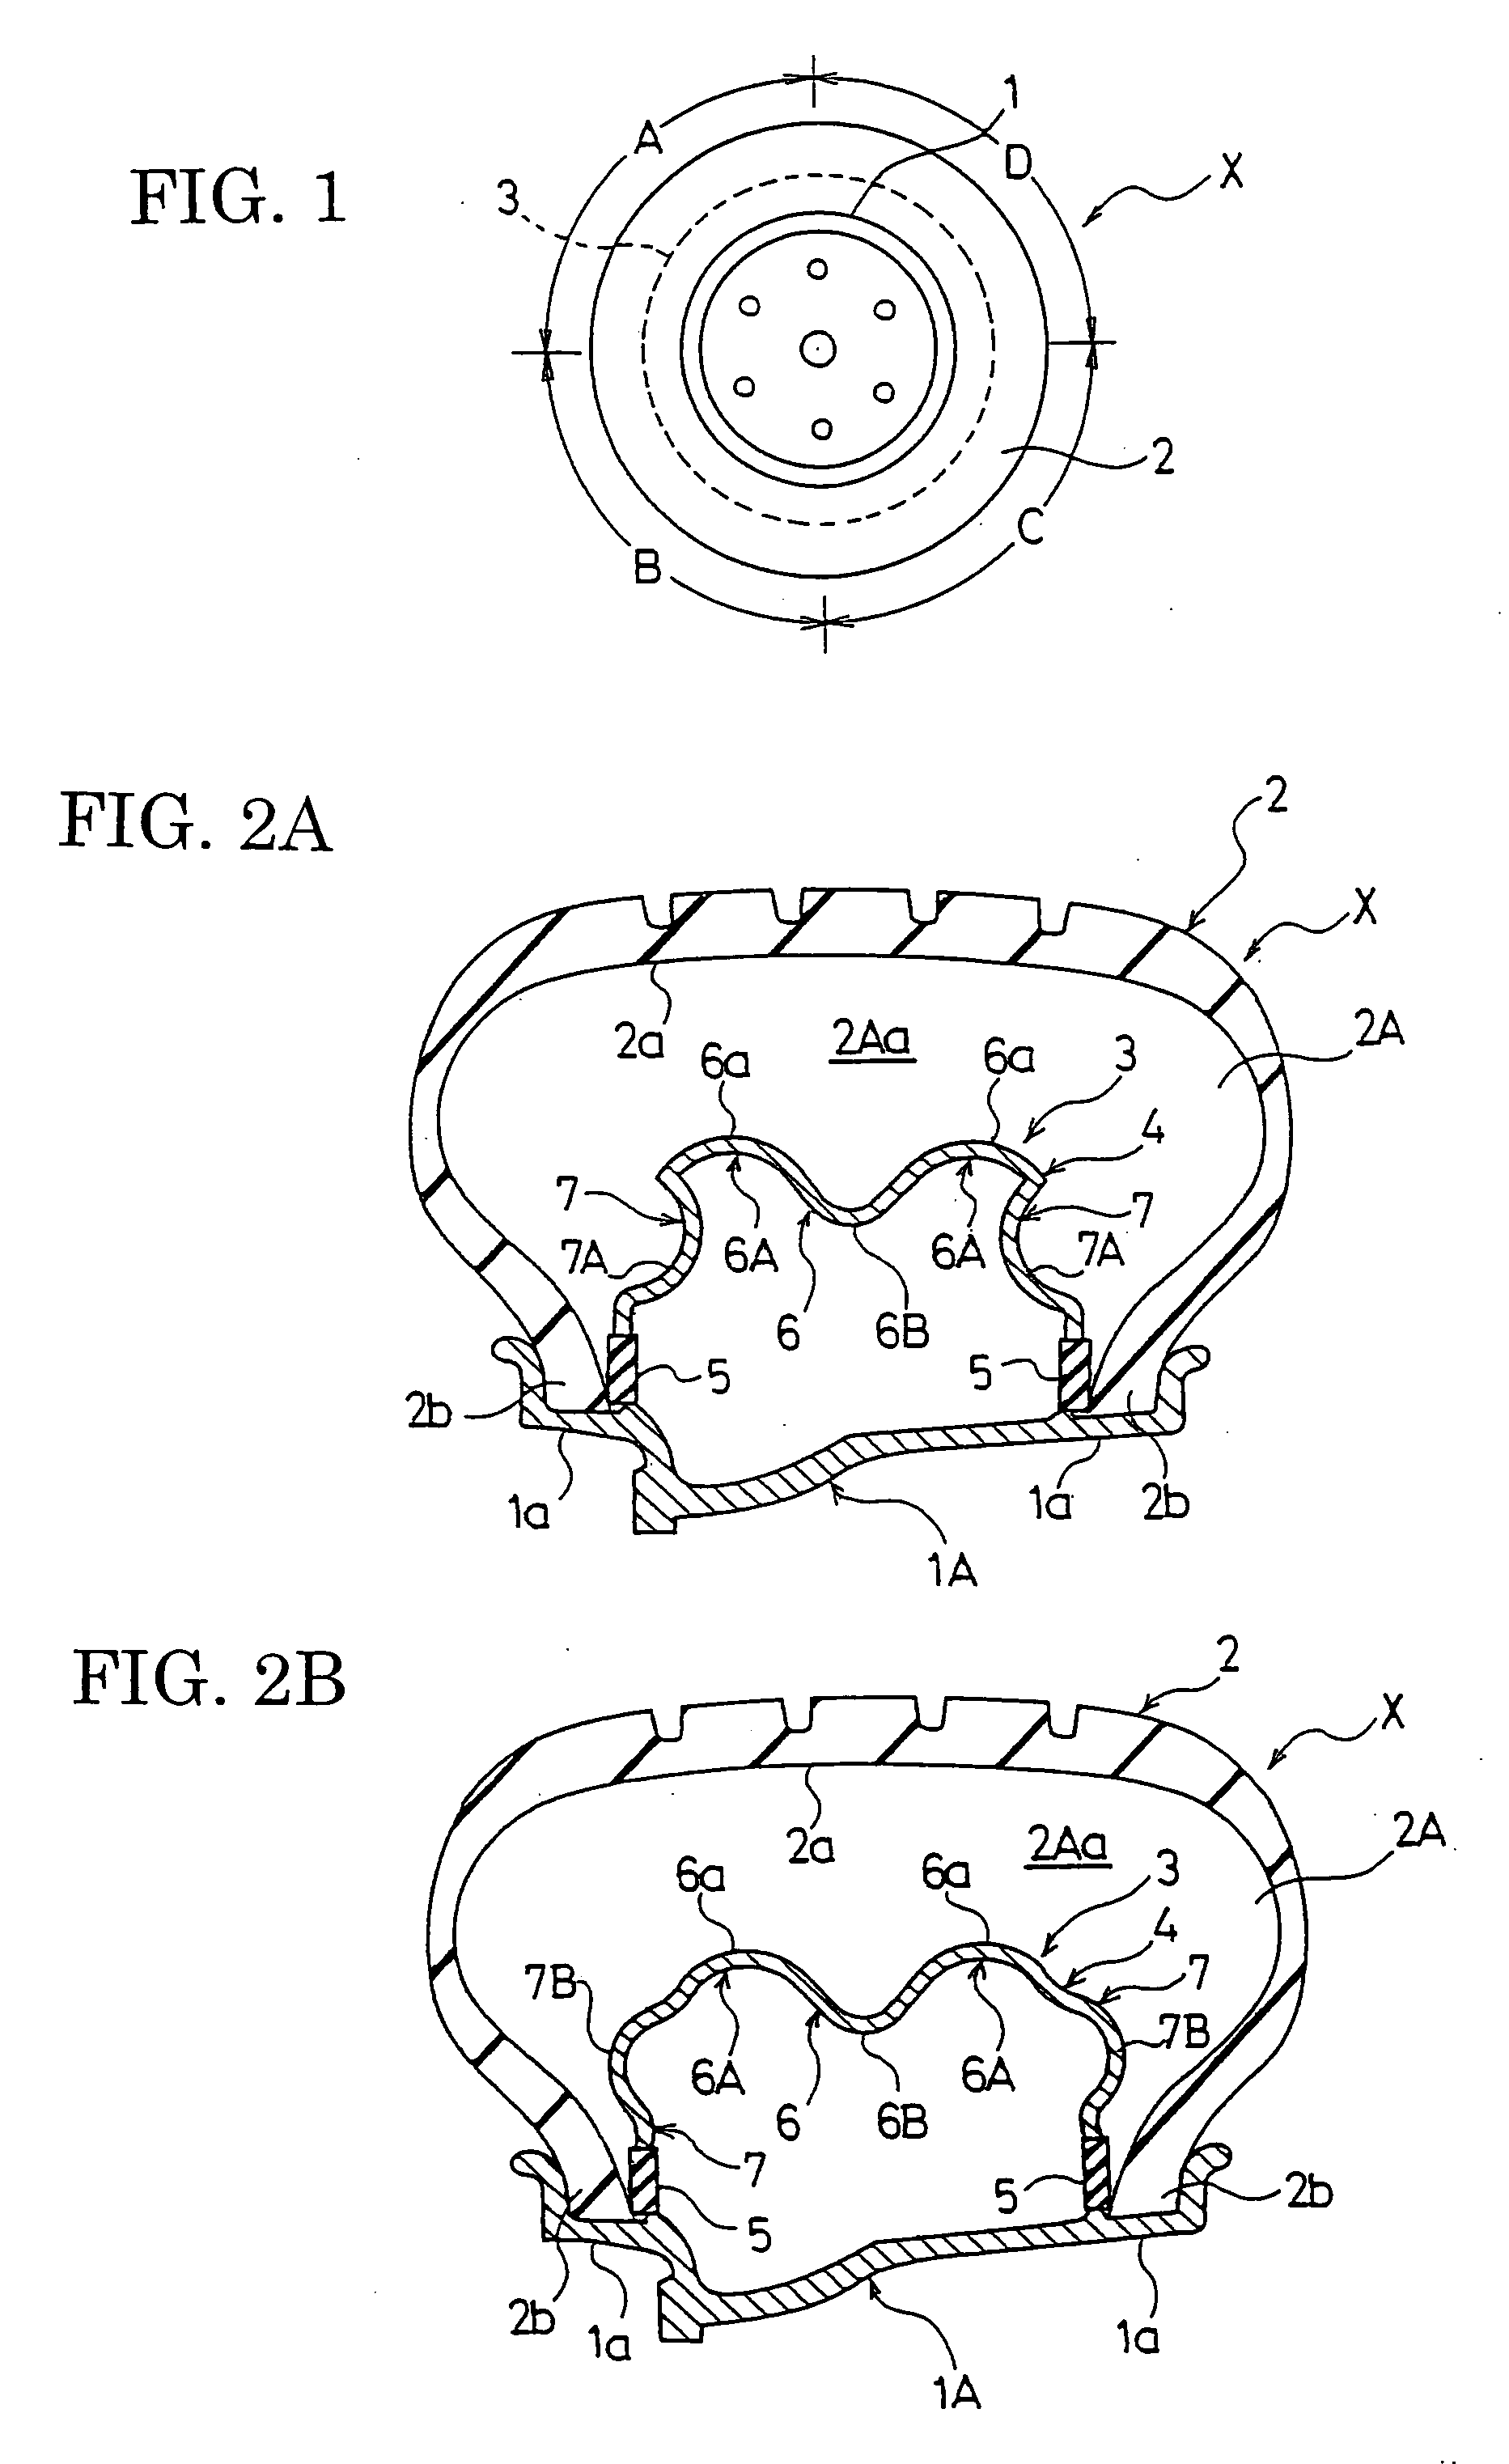 Tire/wheel assembly and run-flat support member